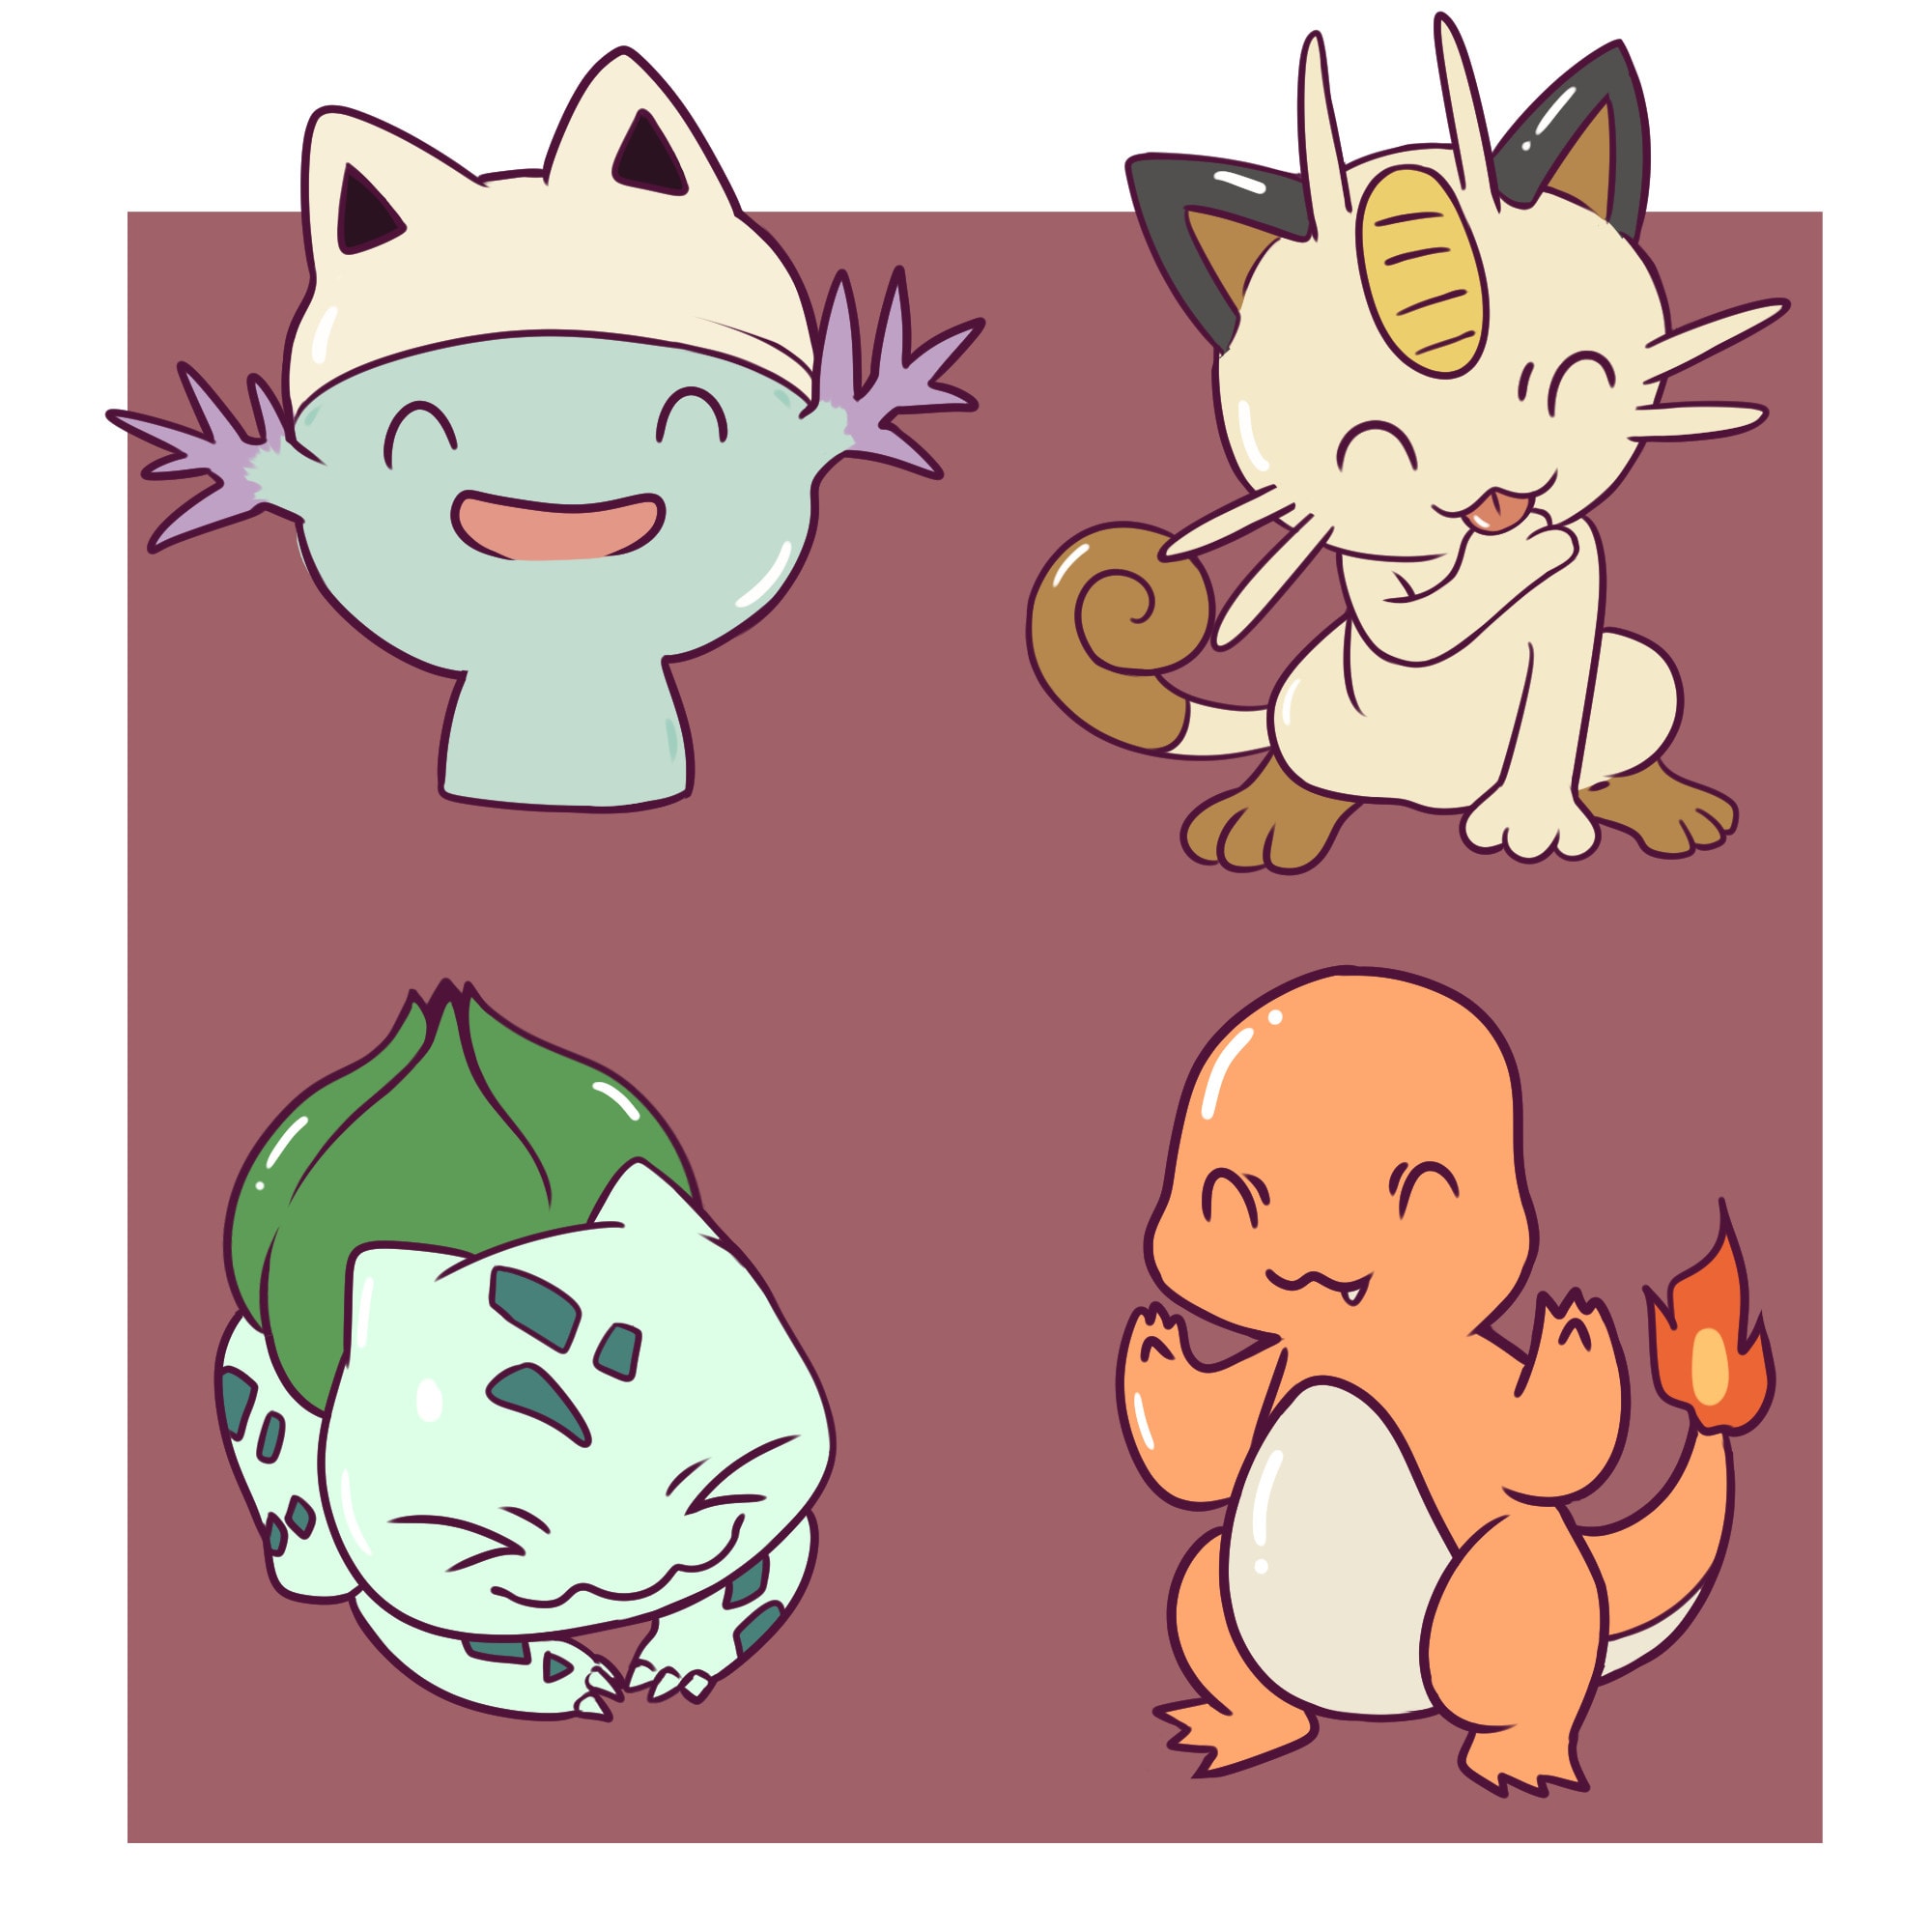 Draw cute pokemon doodle art and fakemon anime by Faiahaato | Fiverr